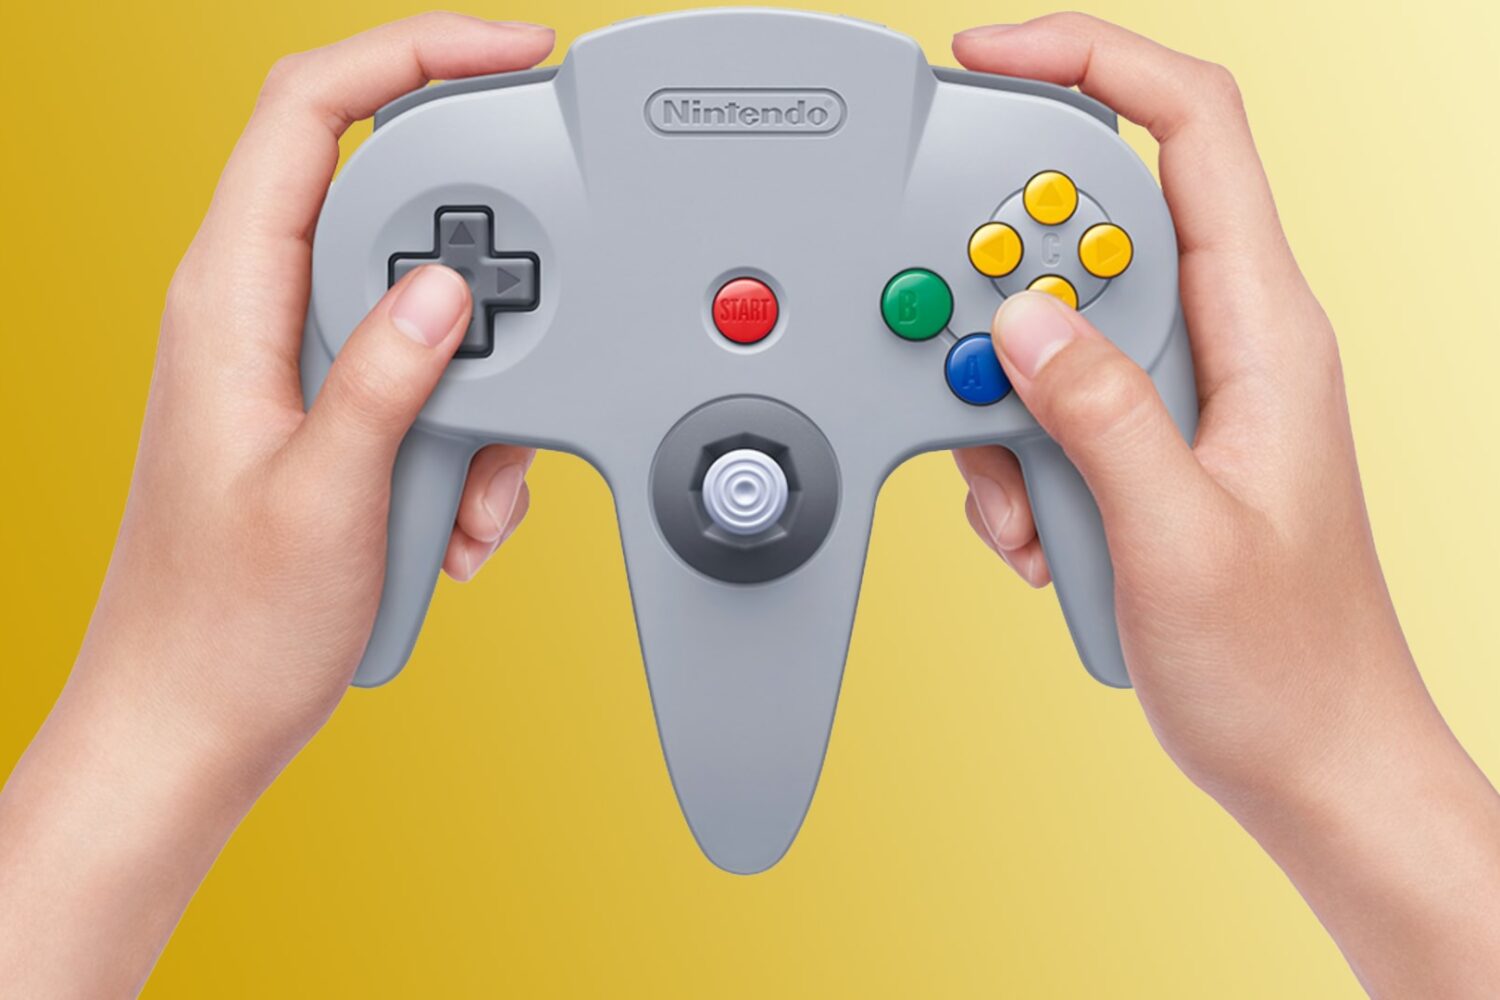 Nintendo's reworked N64 controller for Switch held in hands